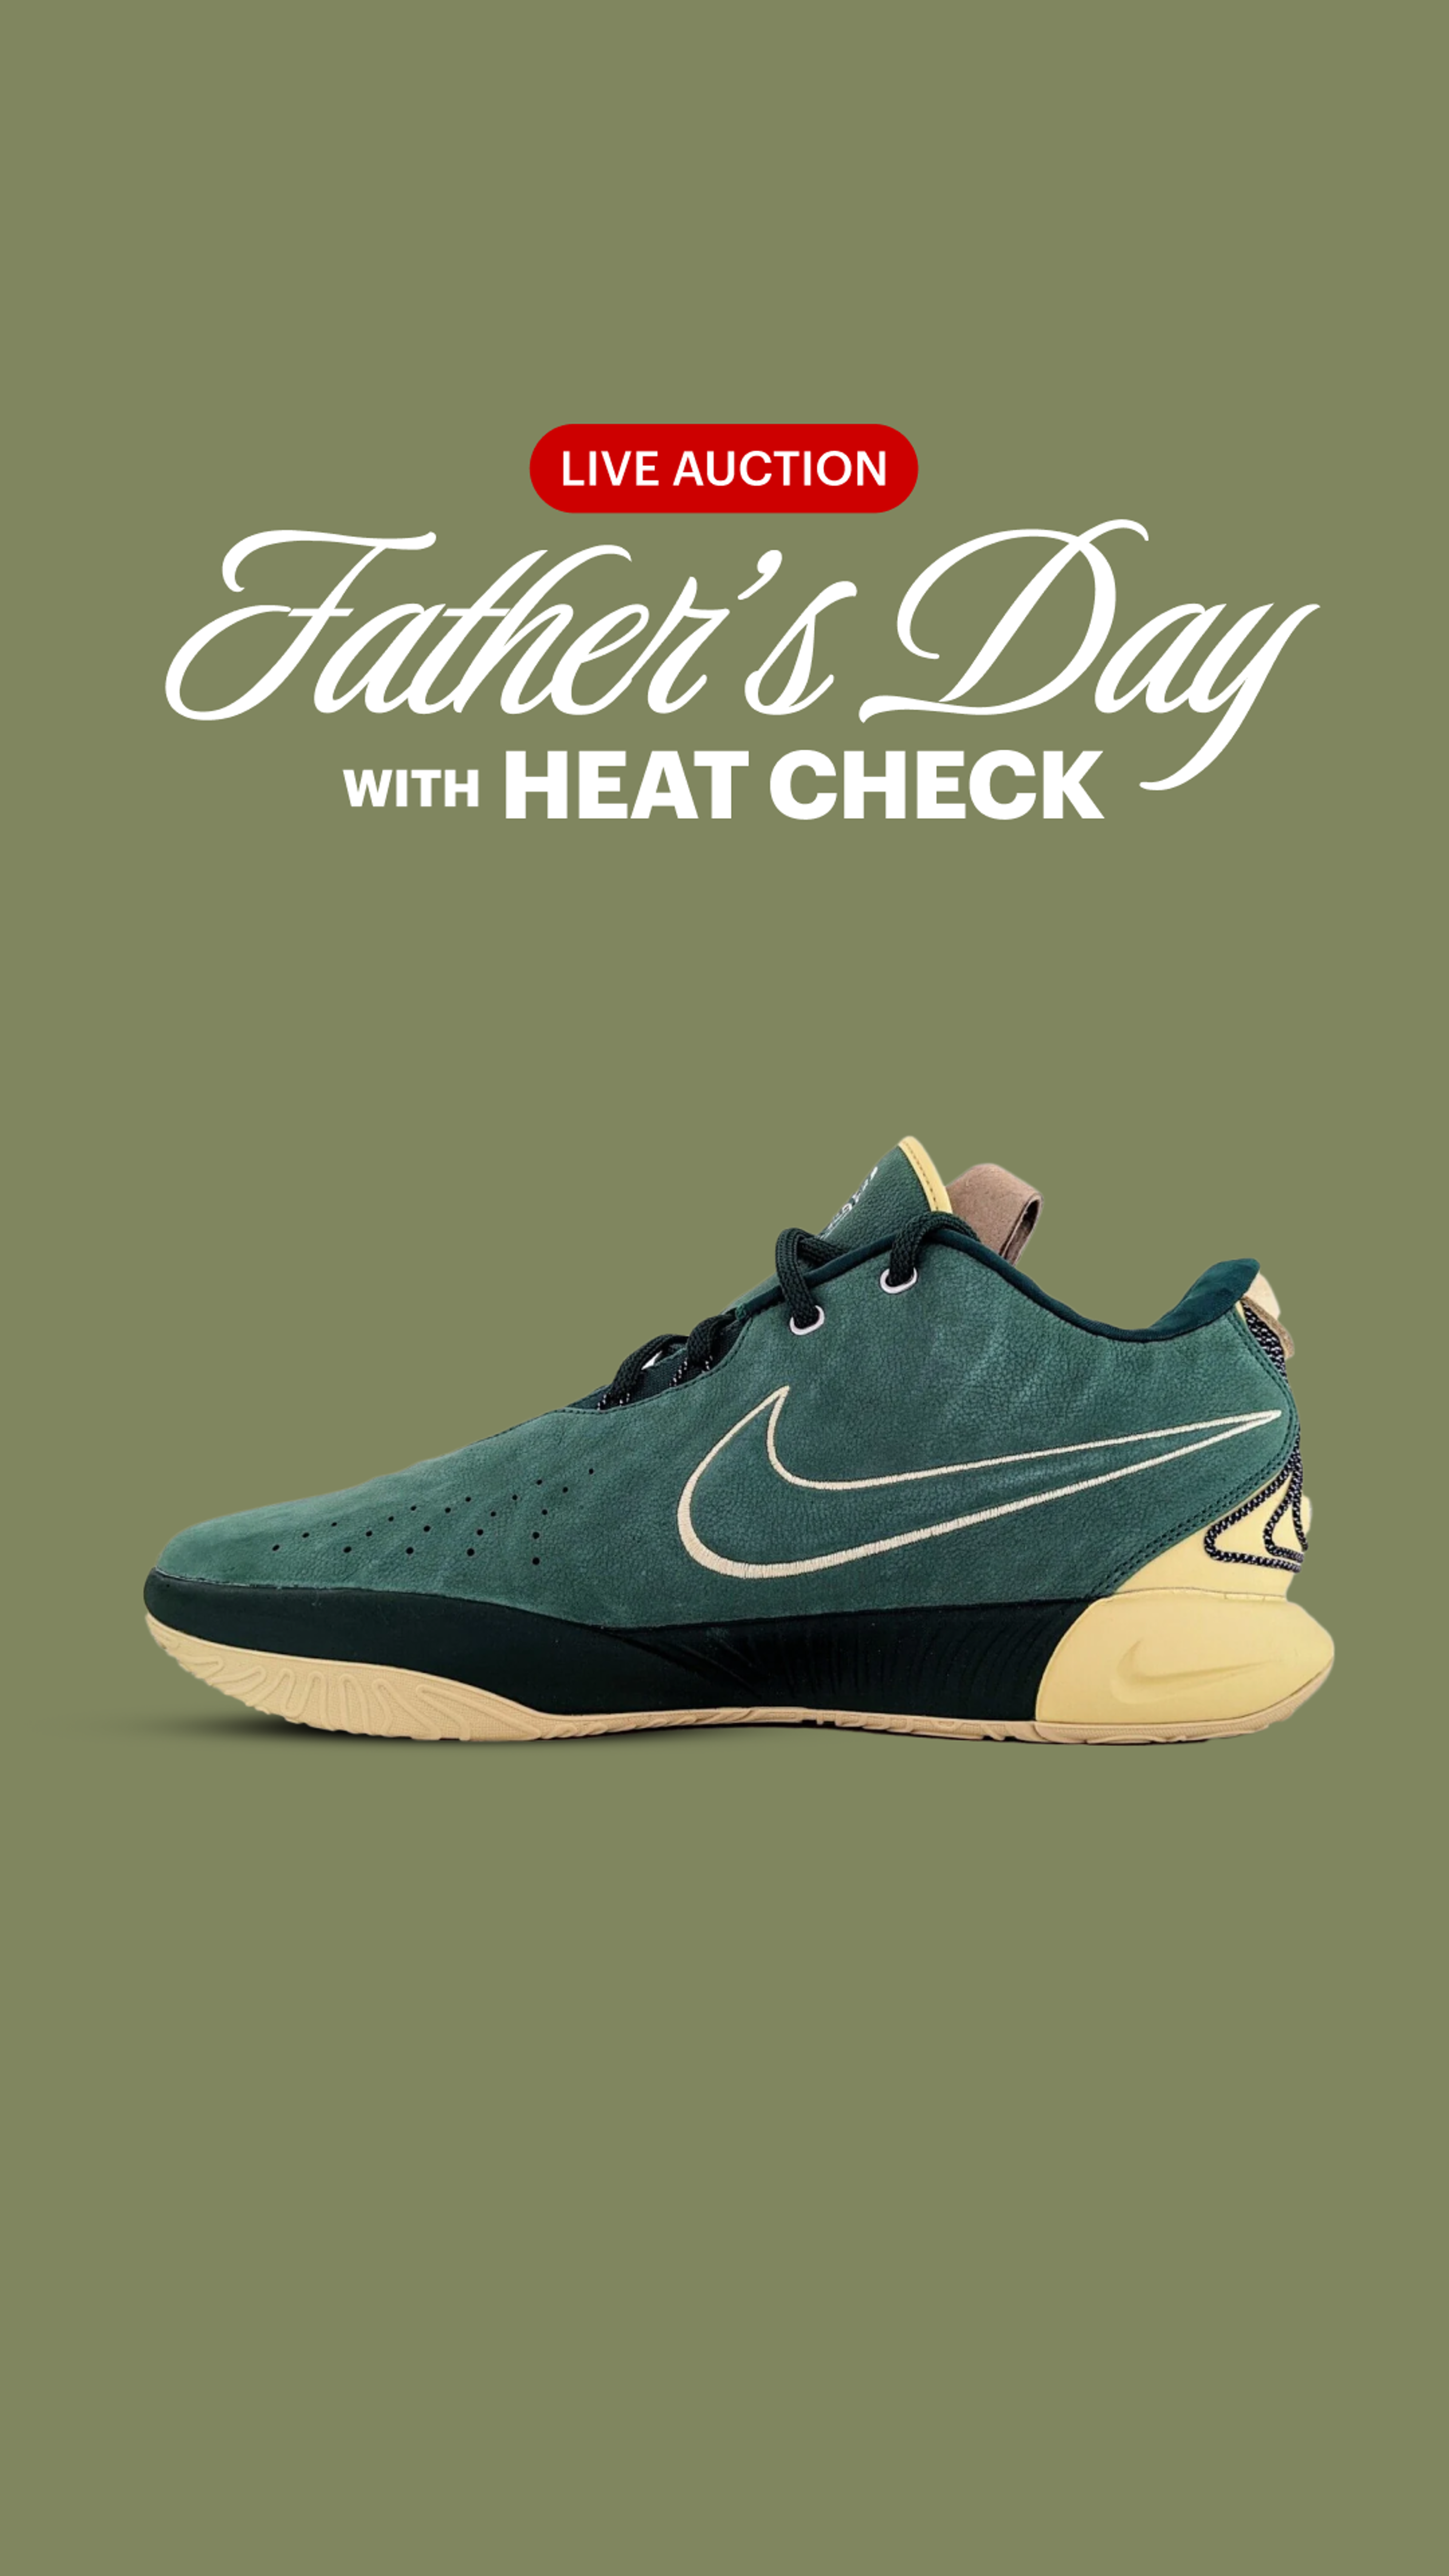 Preview image for the show titled "NTWRK Curated Shopping Guide: Father's Day w/ The Heat Check" at May 15, 2024